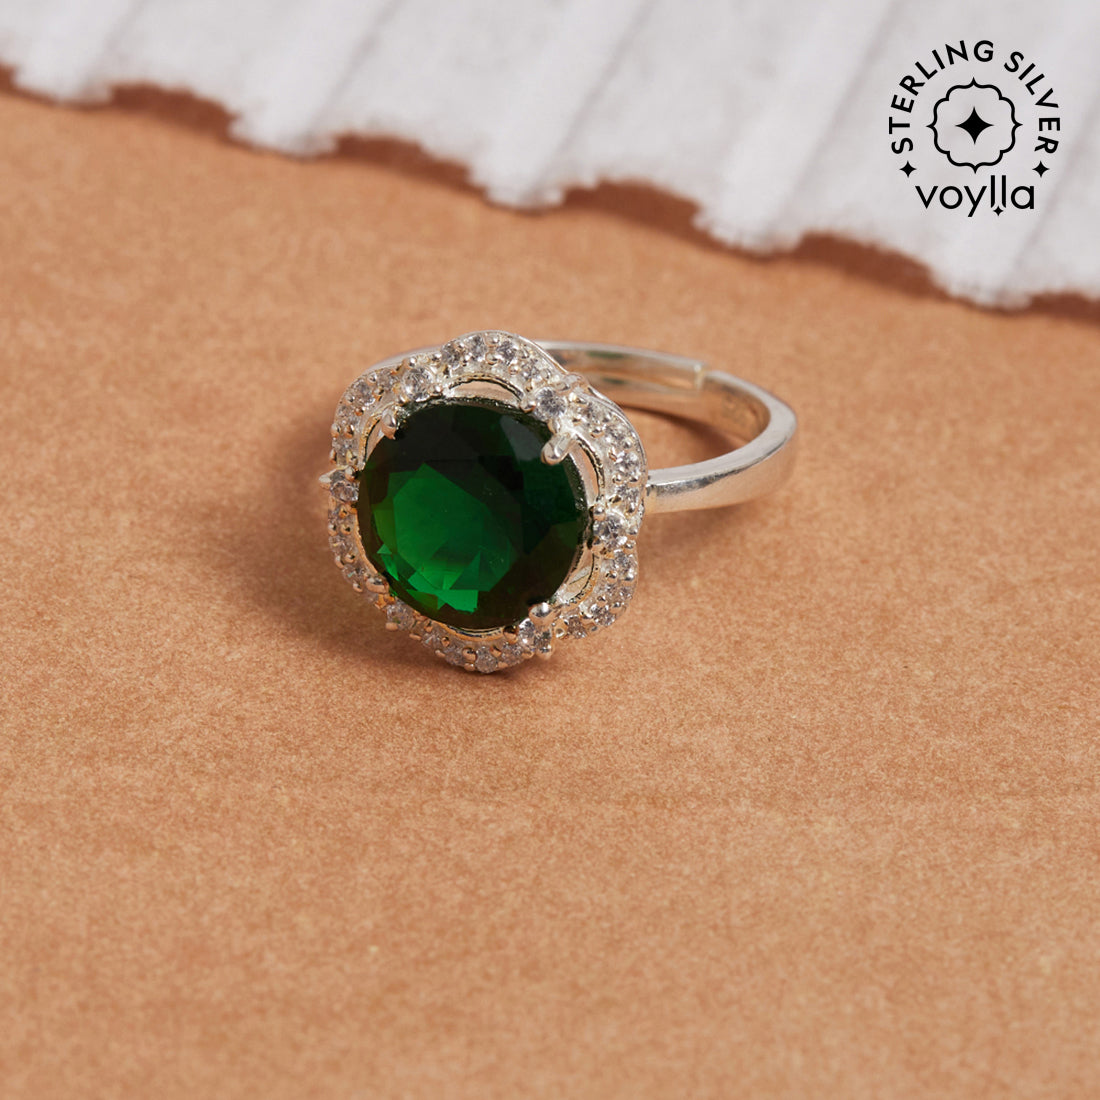 Women's Elevated Emerald Cz 925 Sterling Silver Adjustable Ring - Voylla